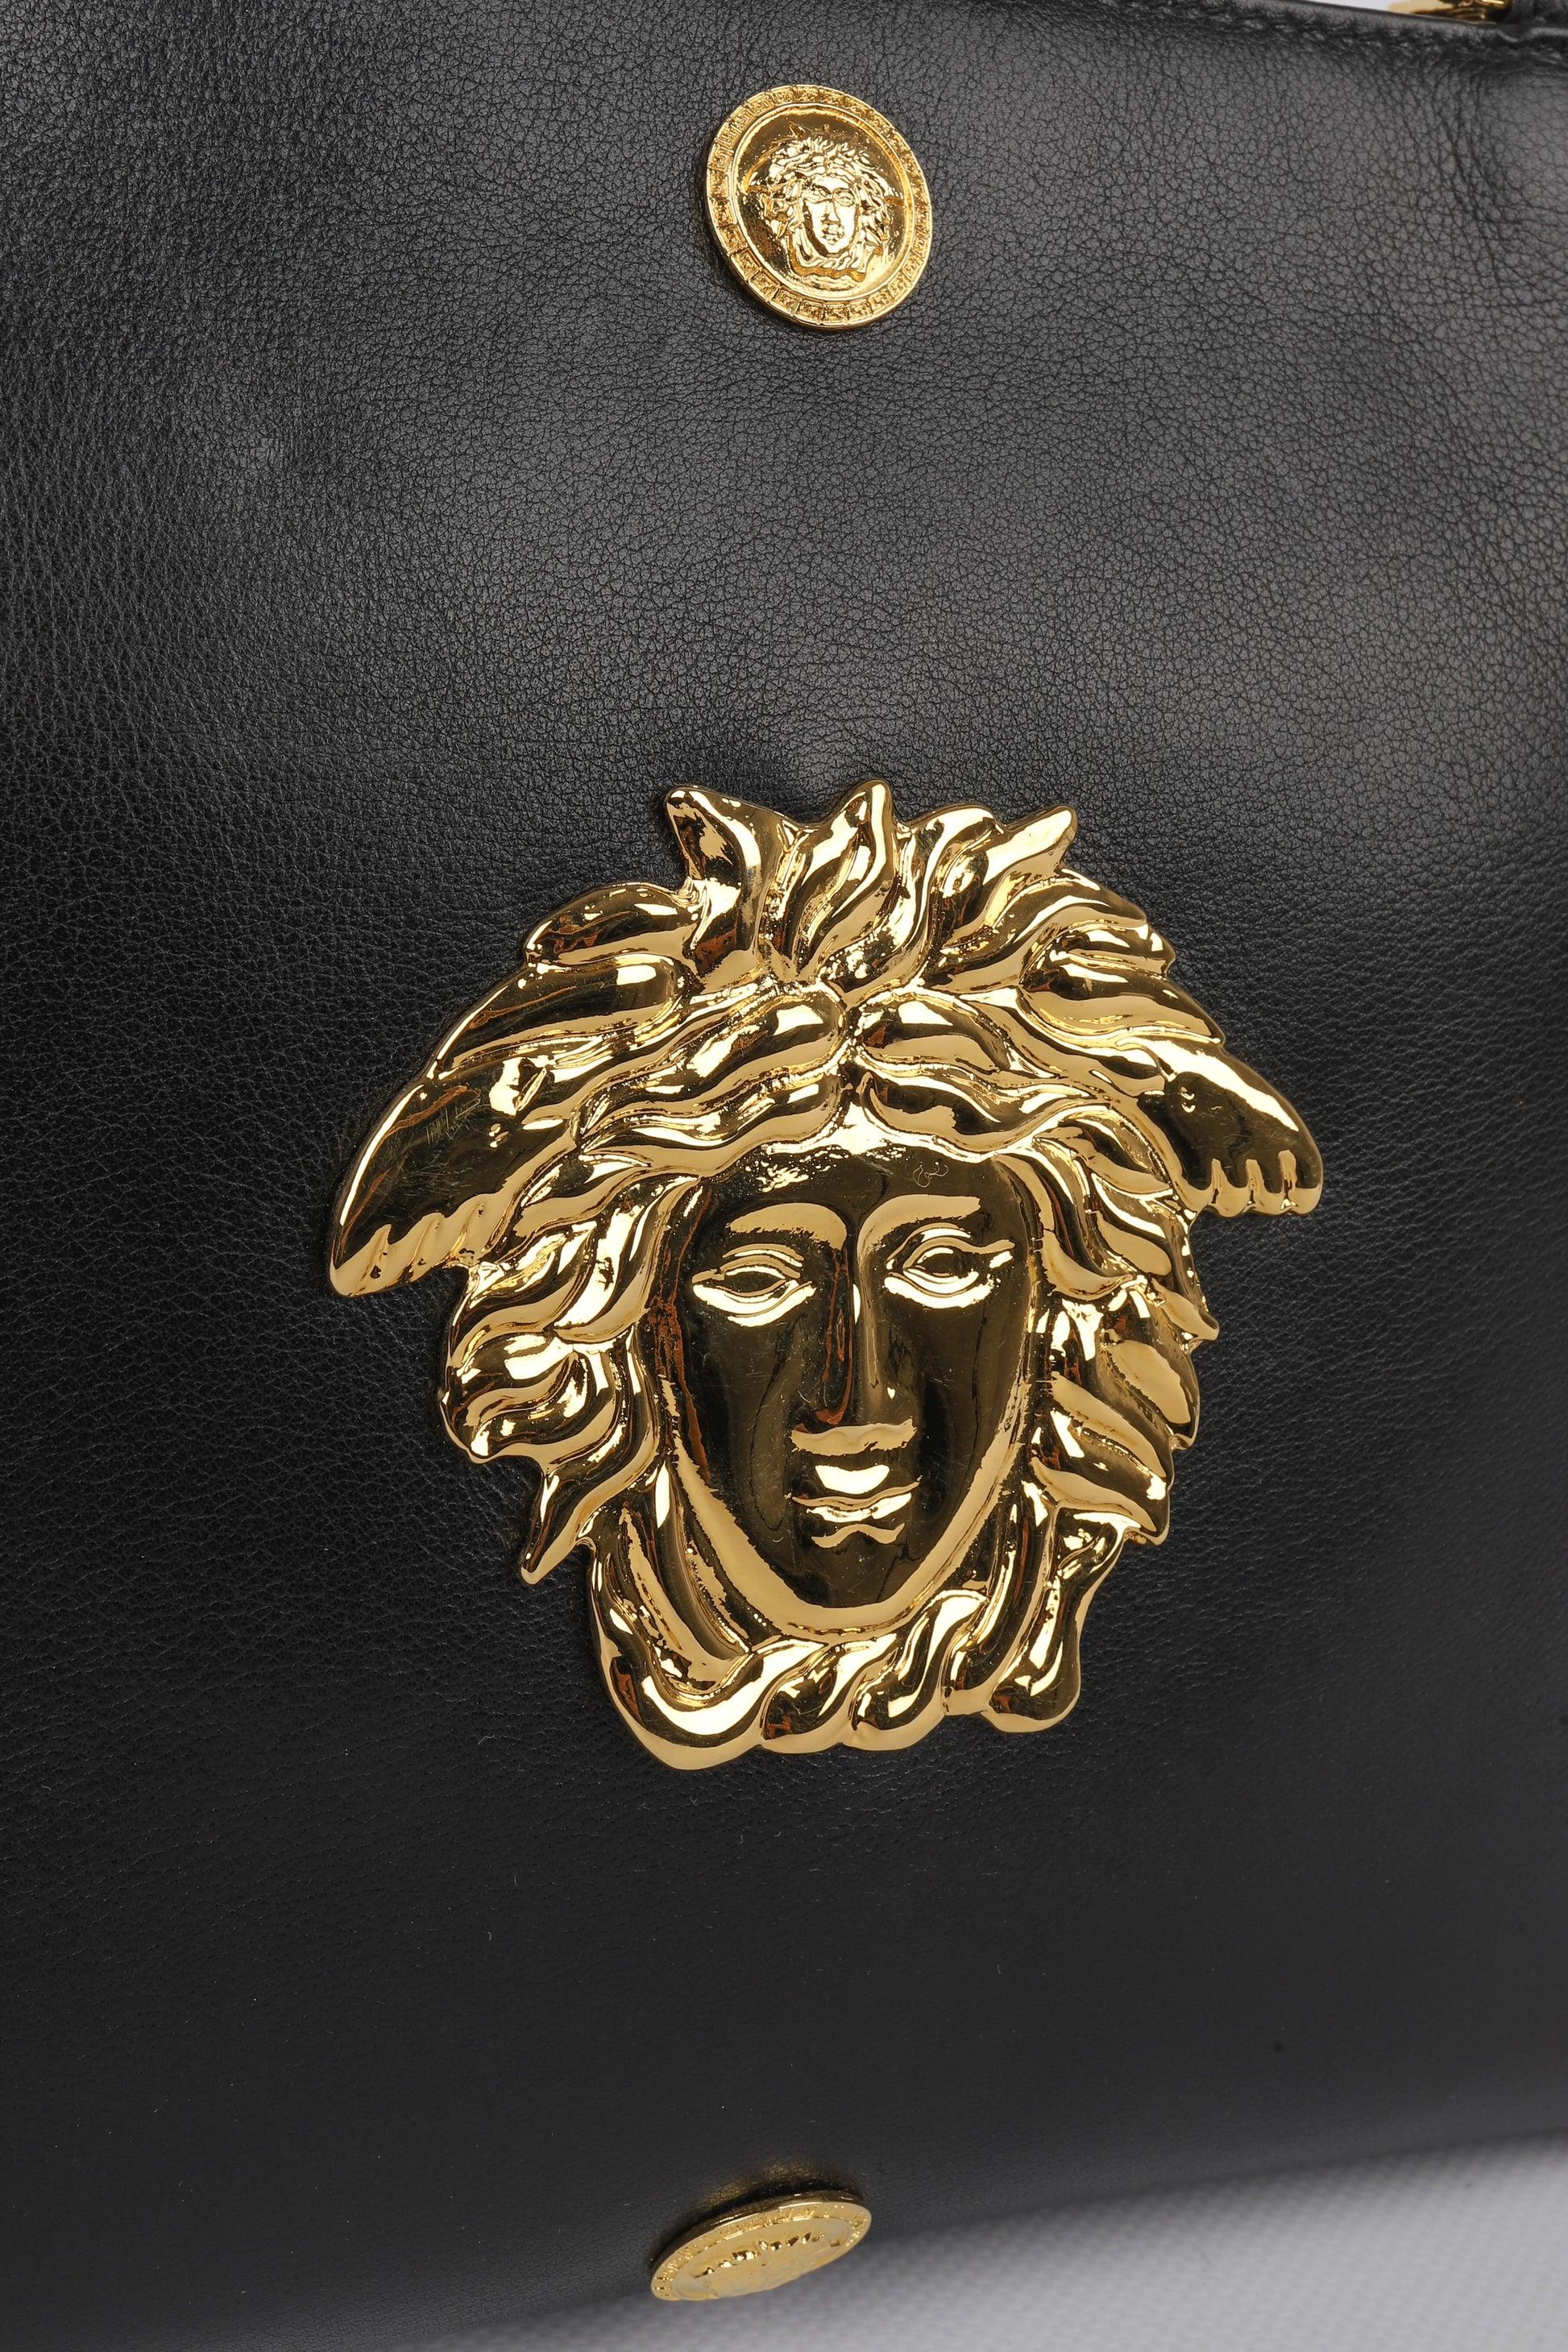 Gianni Versace Black Leather Bag with Golden Metal Elements For Sale 1